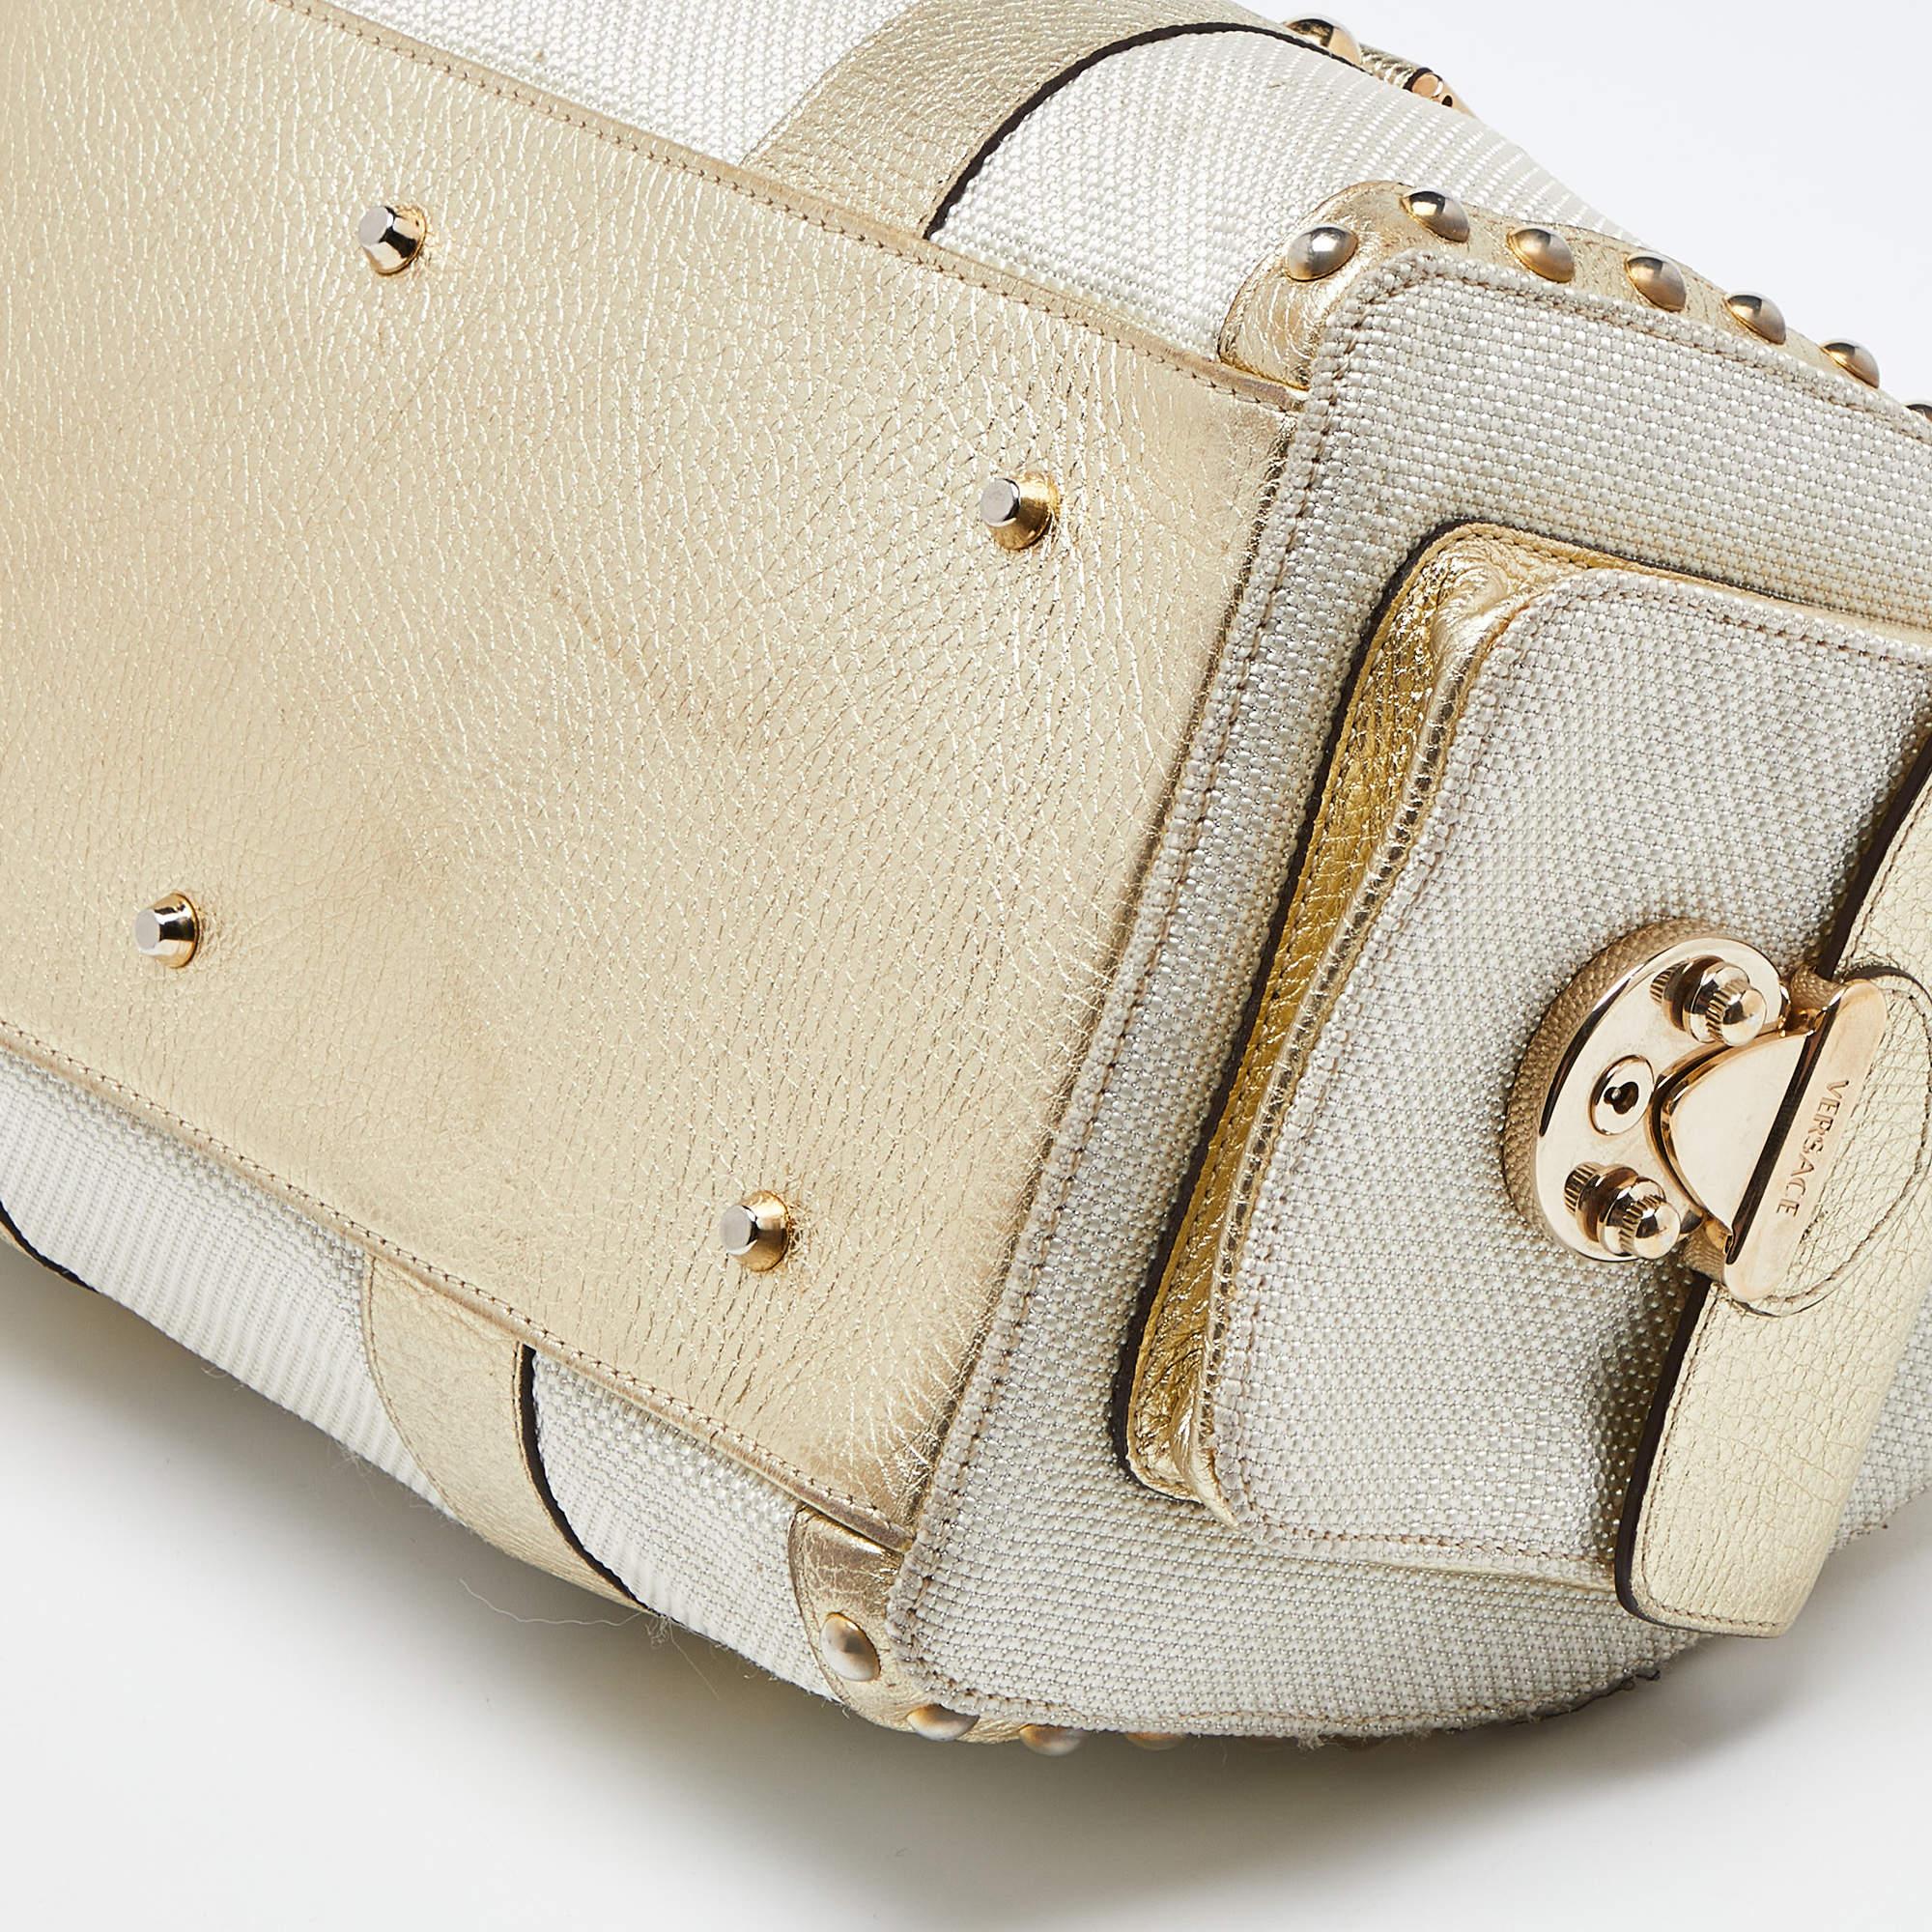 Versace Beige/Gold Nylon and Leather Studded Madonna Satchel For Sale 5